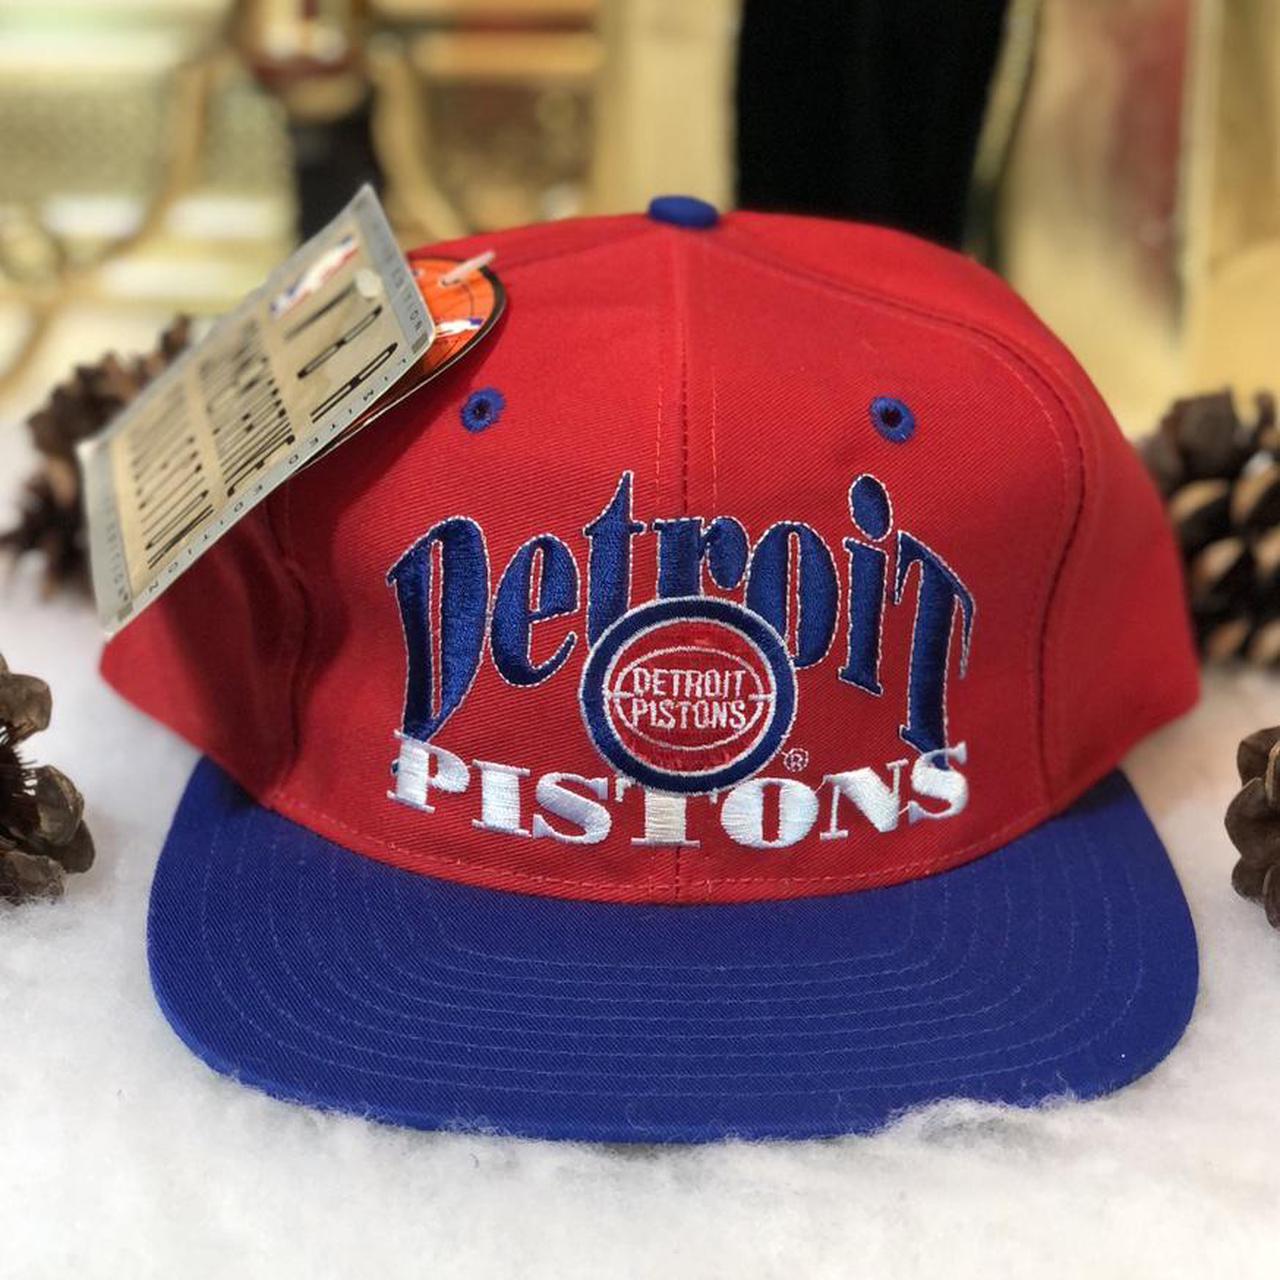 Vintage Deadstock NWT NBA Detroit Pistons The Game Limited Edition 591 of 2000 Snapback Hat